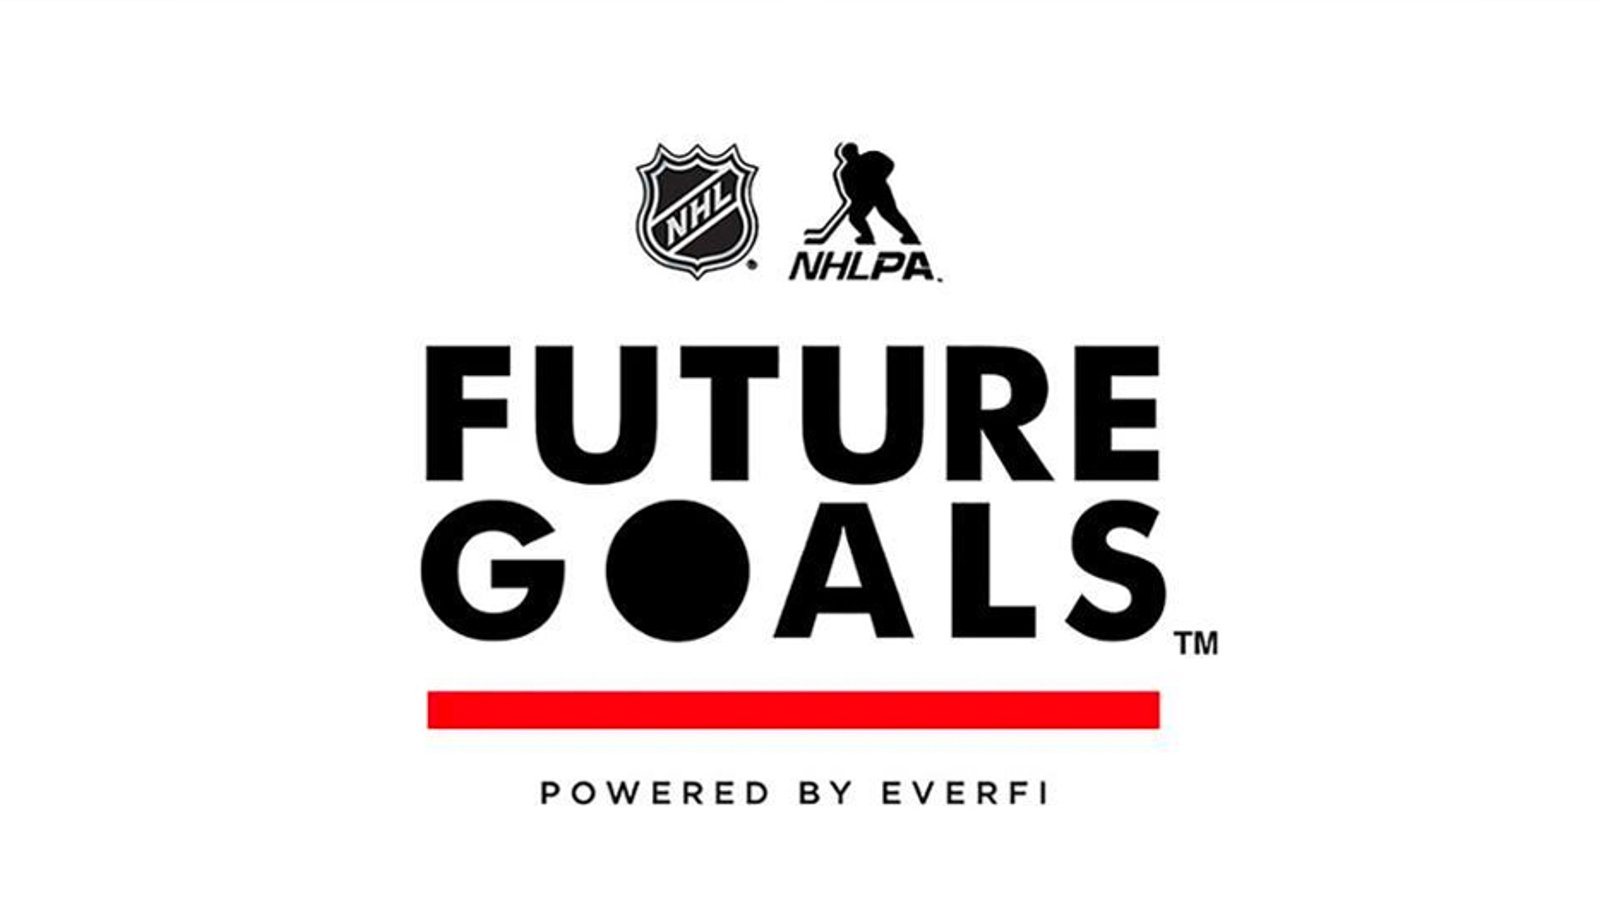 NHL provides free access to Future Goals educational program for kids stuck at home